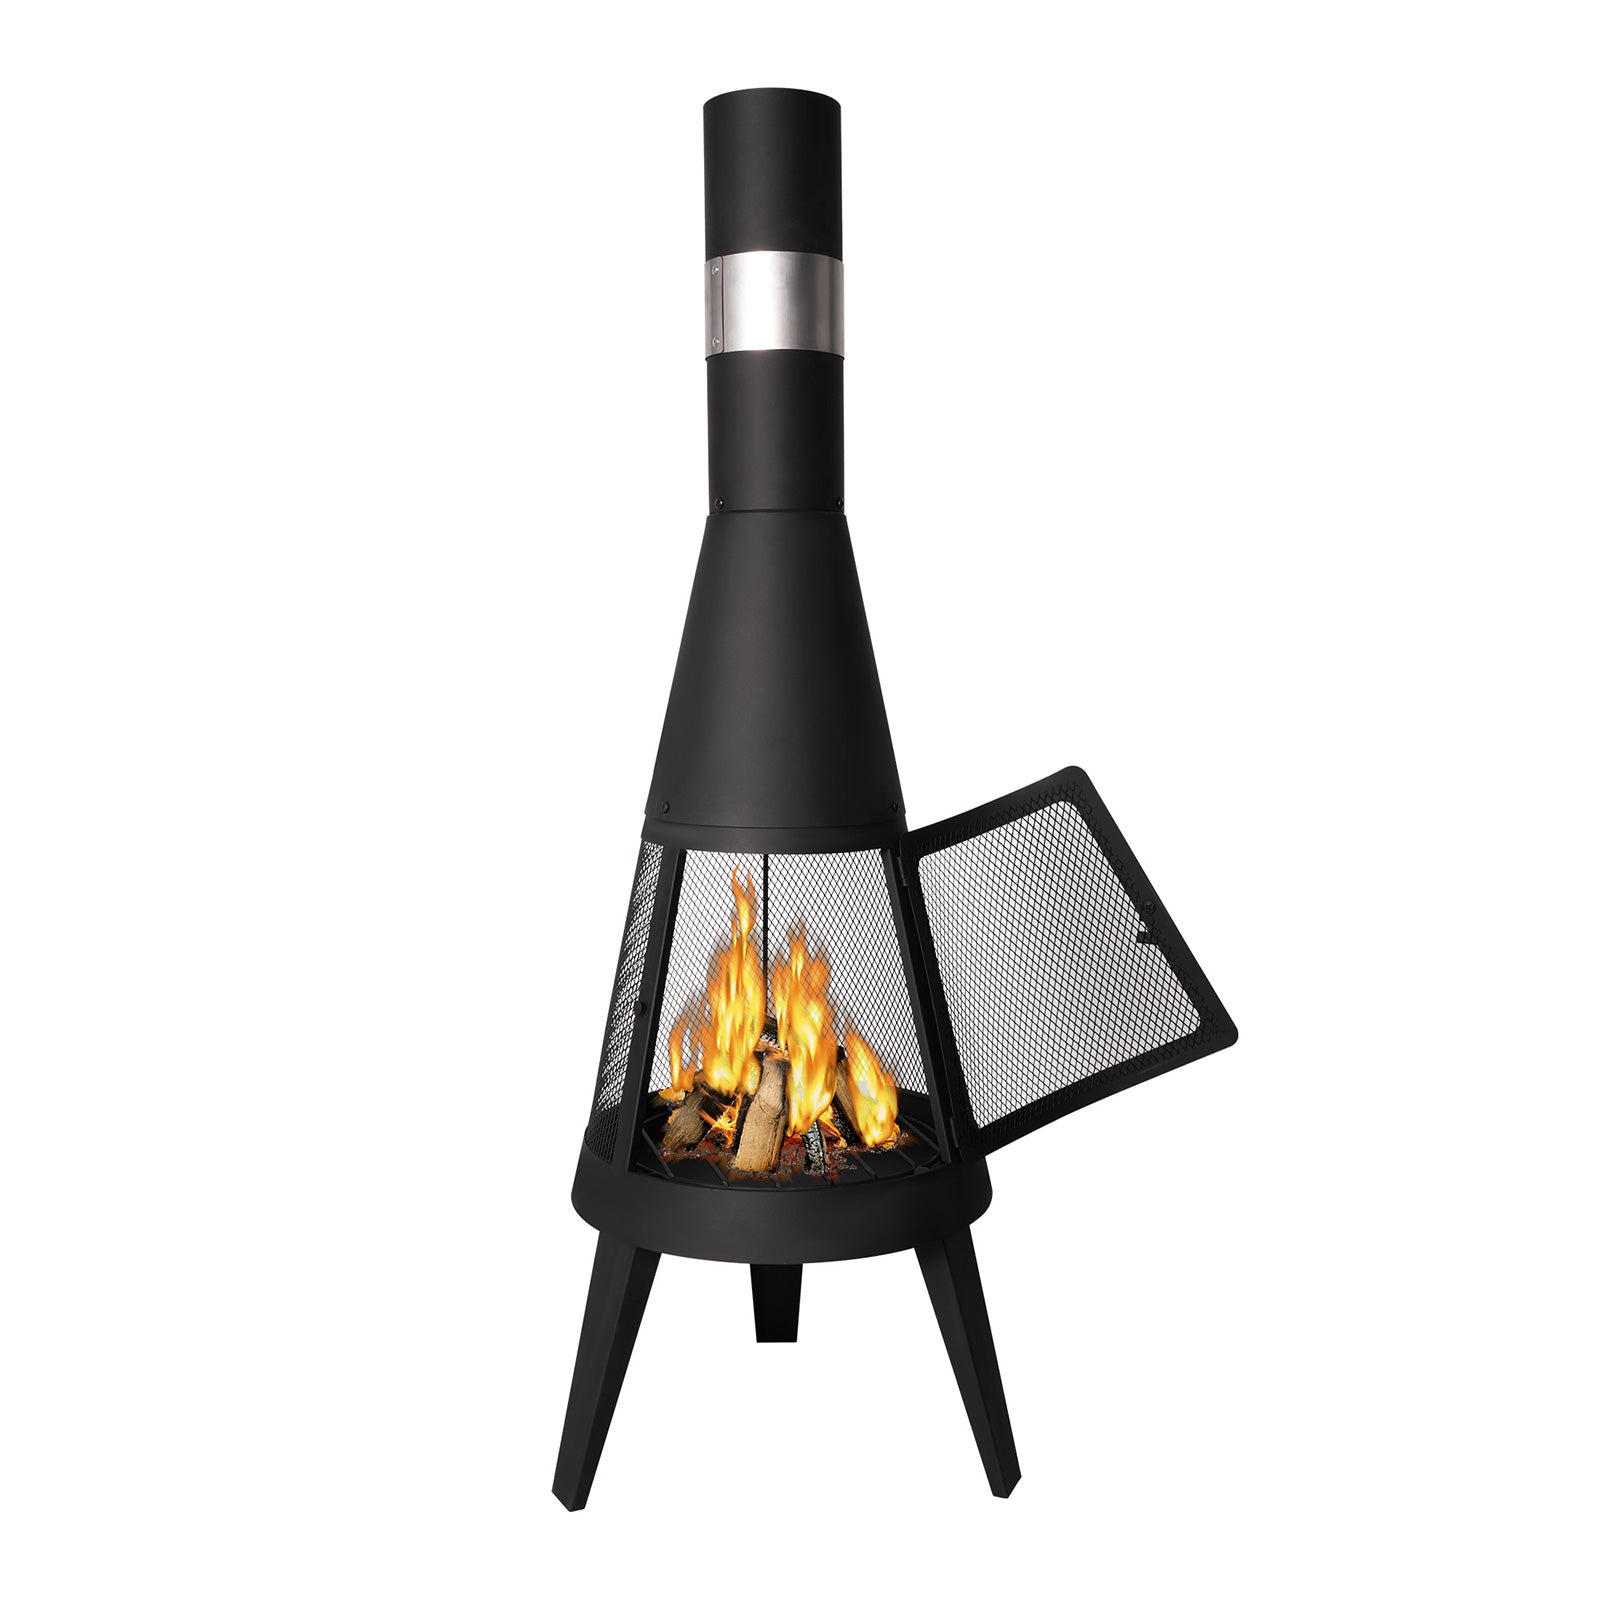 Chiminea Outdoor Fireplace 47.6" Metal Wood Burning Fire Pit with Log Grate, Black